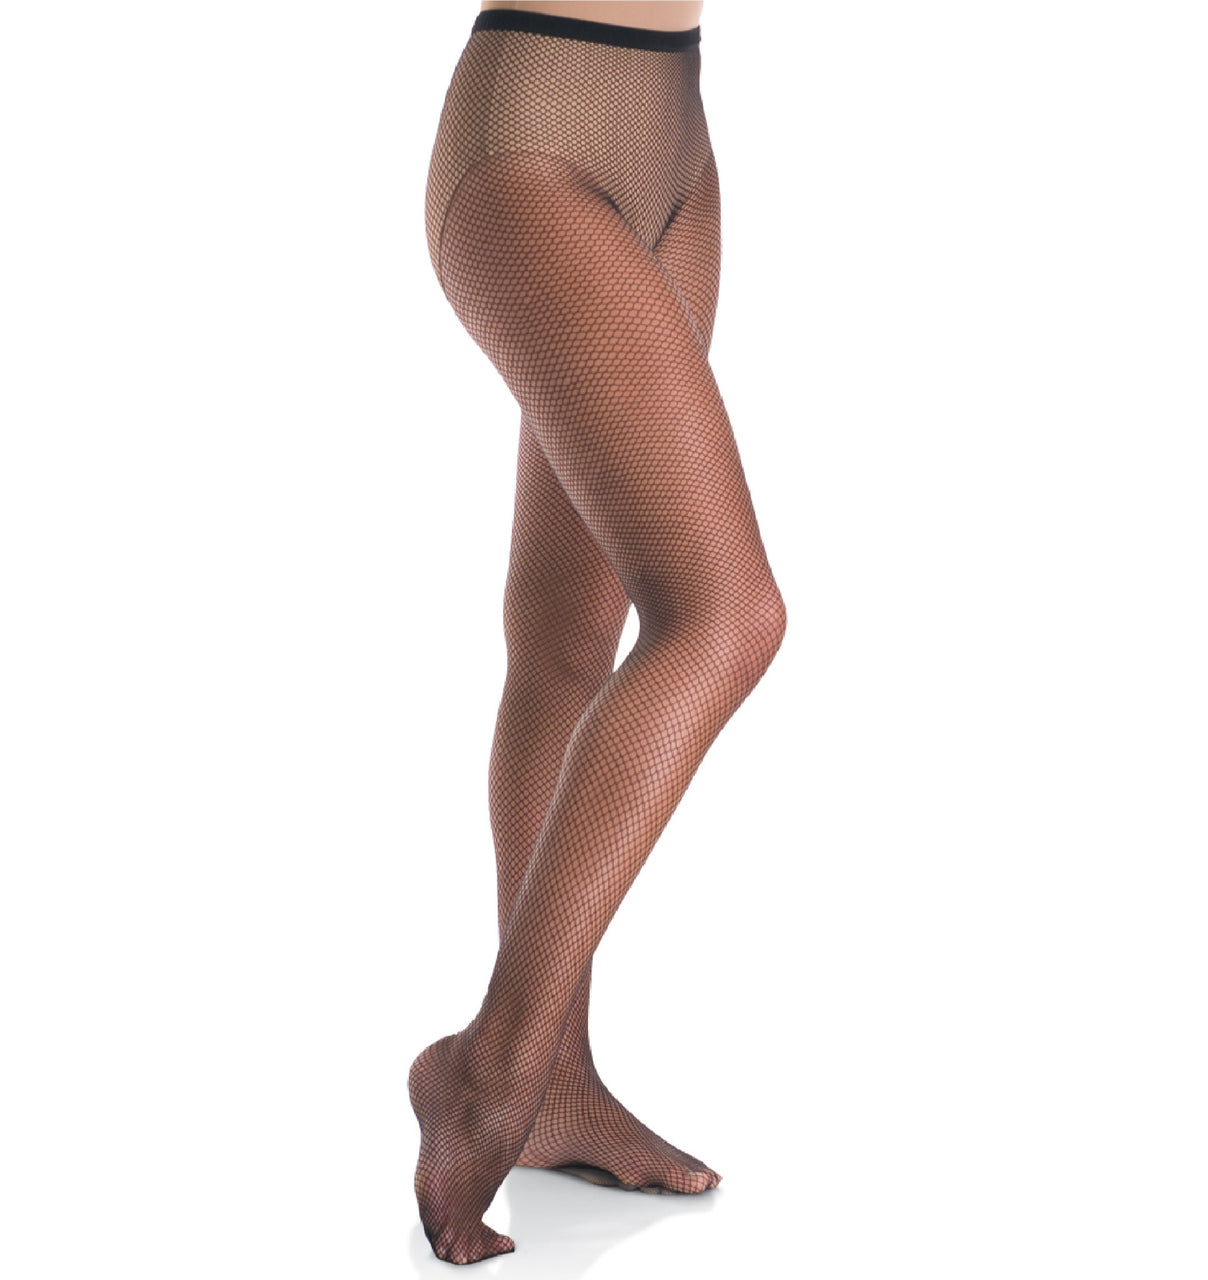 Child totalSTRETCH Fishnet Seamed Tights